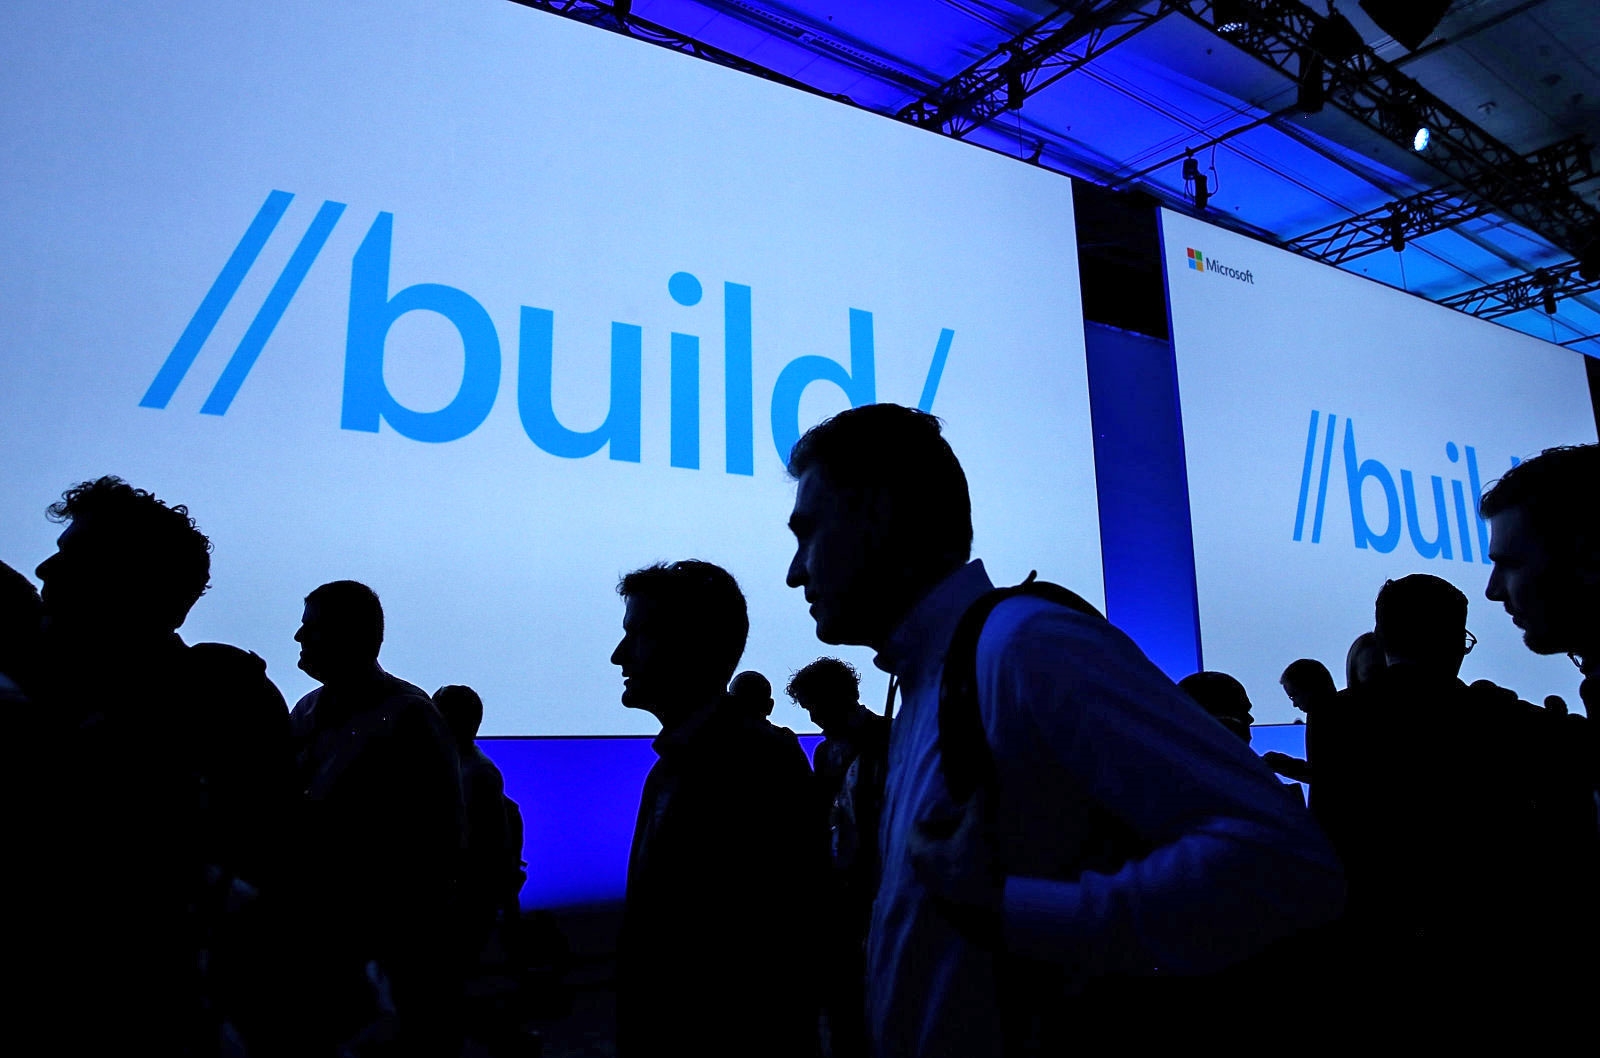 What to expect at Microsoft's Build 2018 conference | DeviceDaily.com